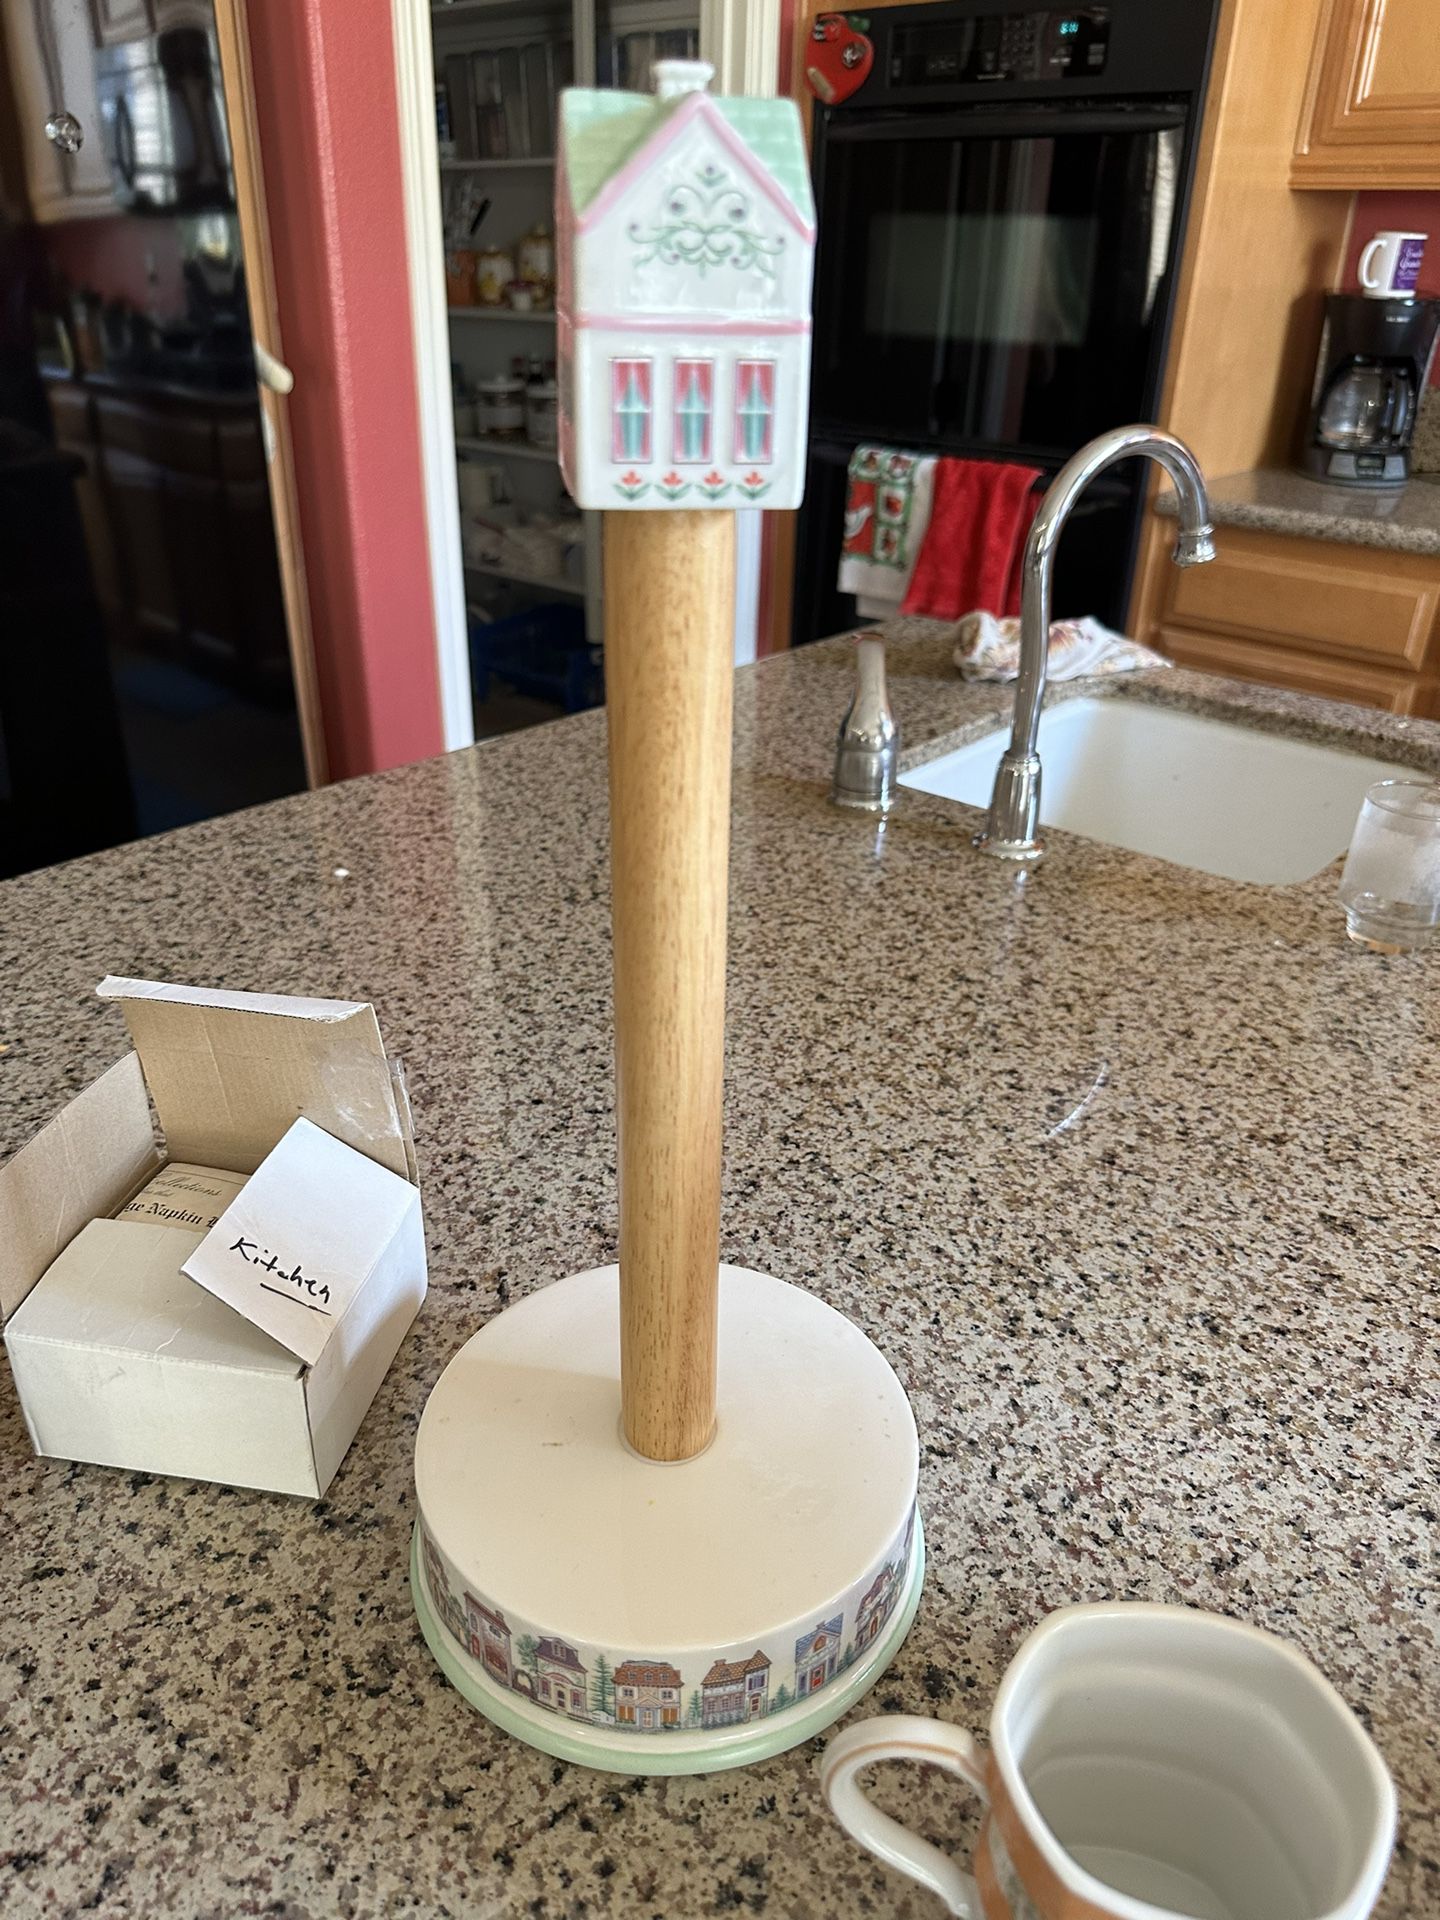 OXO Paper Towel Holder for Sale in Daly City, CA - OfferUp